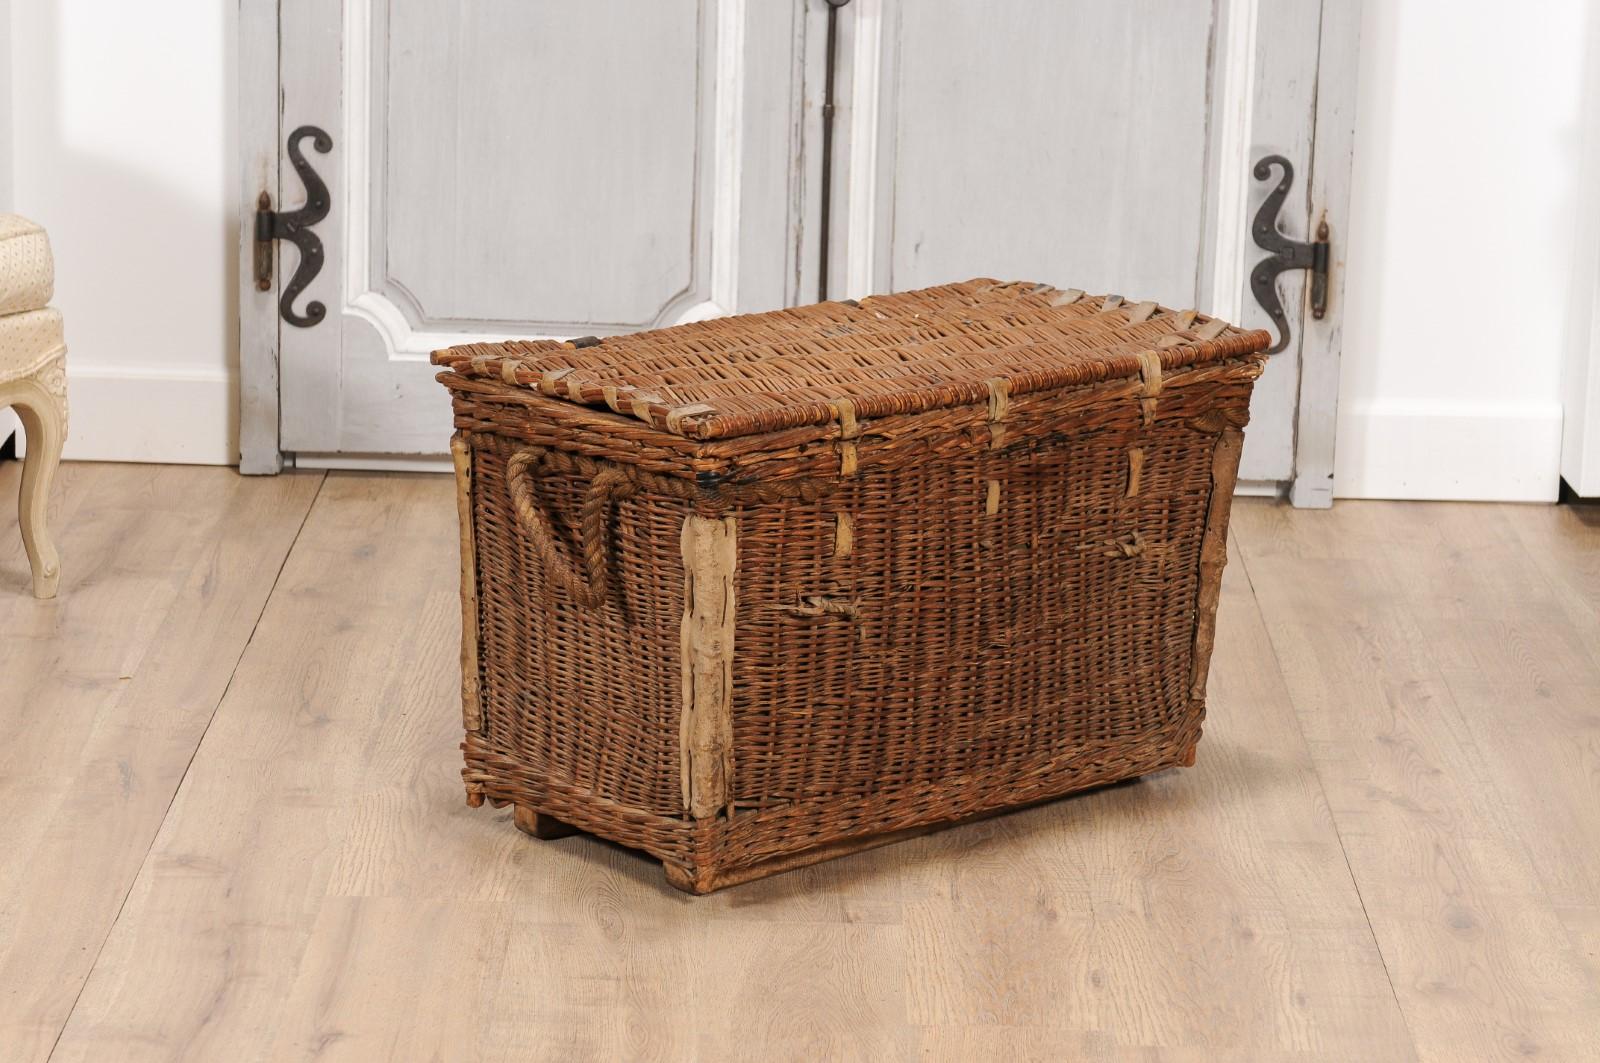 English Rustic 1930s Wicker Trunk with Iron Hardware and Lateral Handles For Sale 5